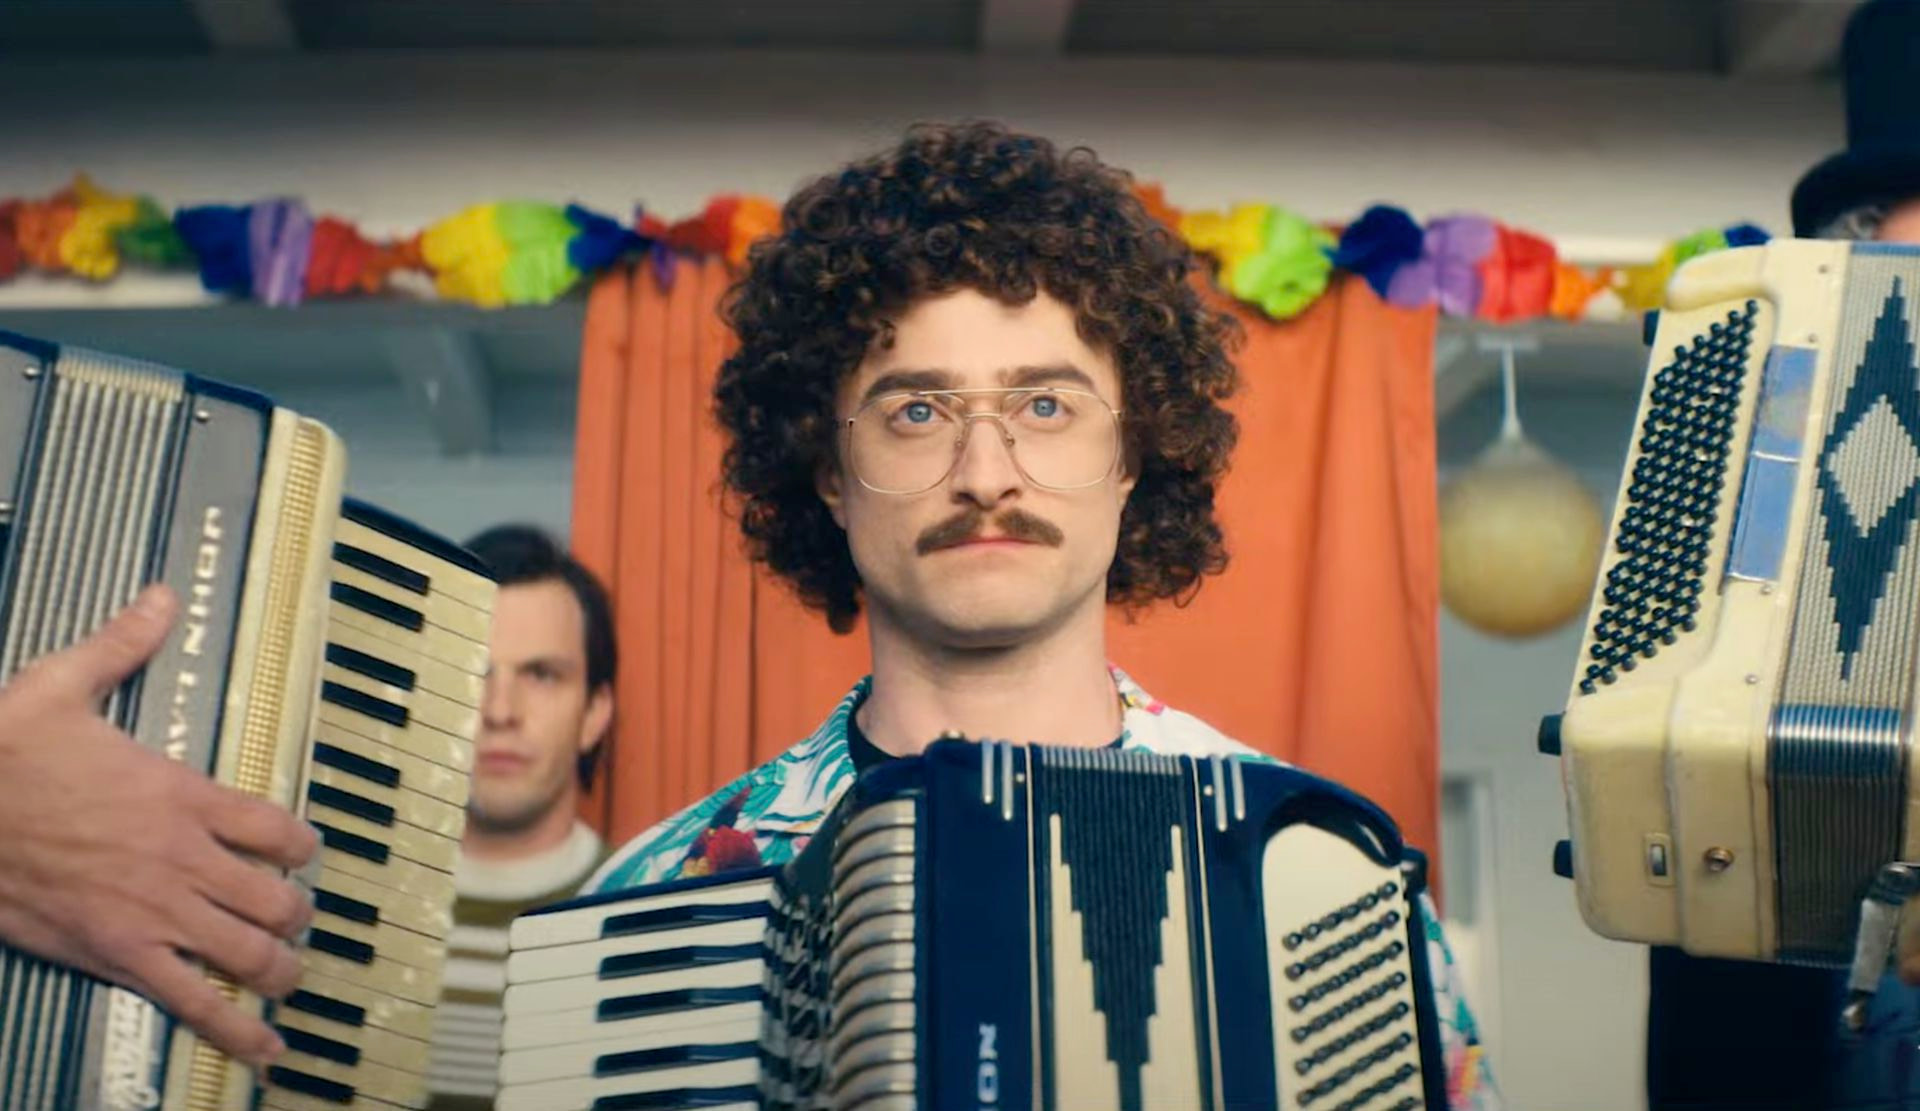 Daniel Radcliffe as Weird Al Yankovic, flanked by accordions, in a still from Weird: The Al Yankovic Story